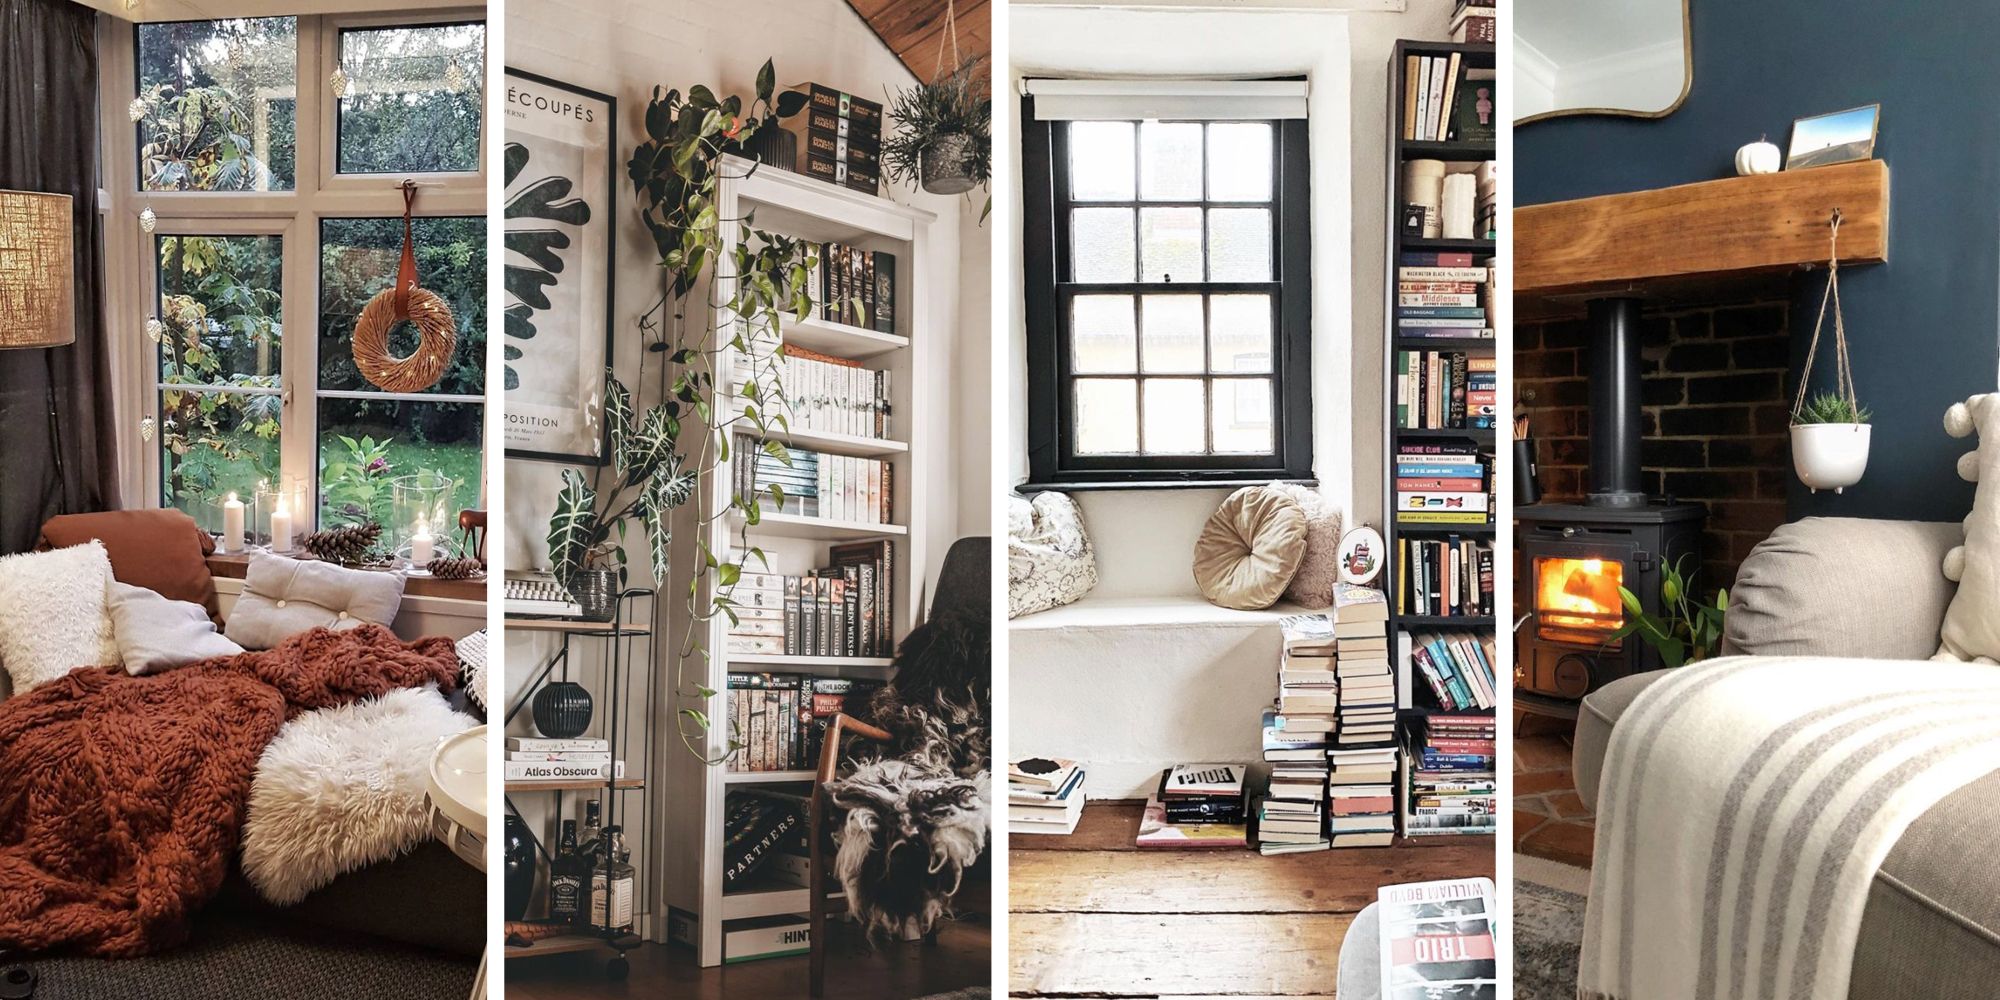 Reading nook ideas – 10 ways to create a cozy hideaway for relaxing with a book